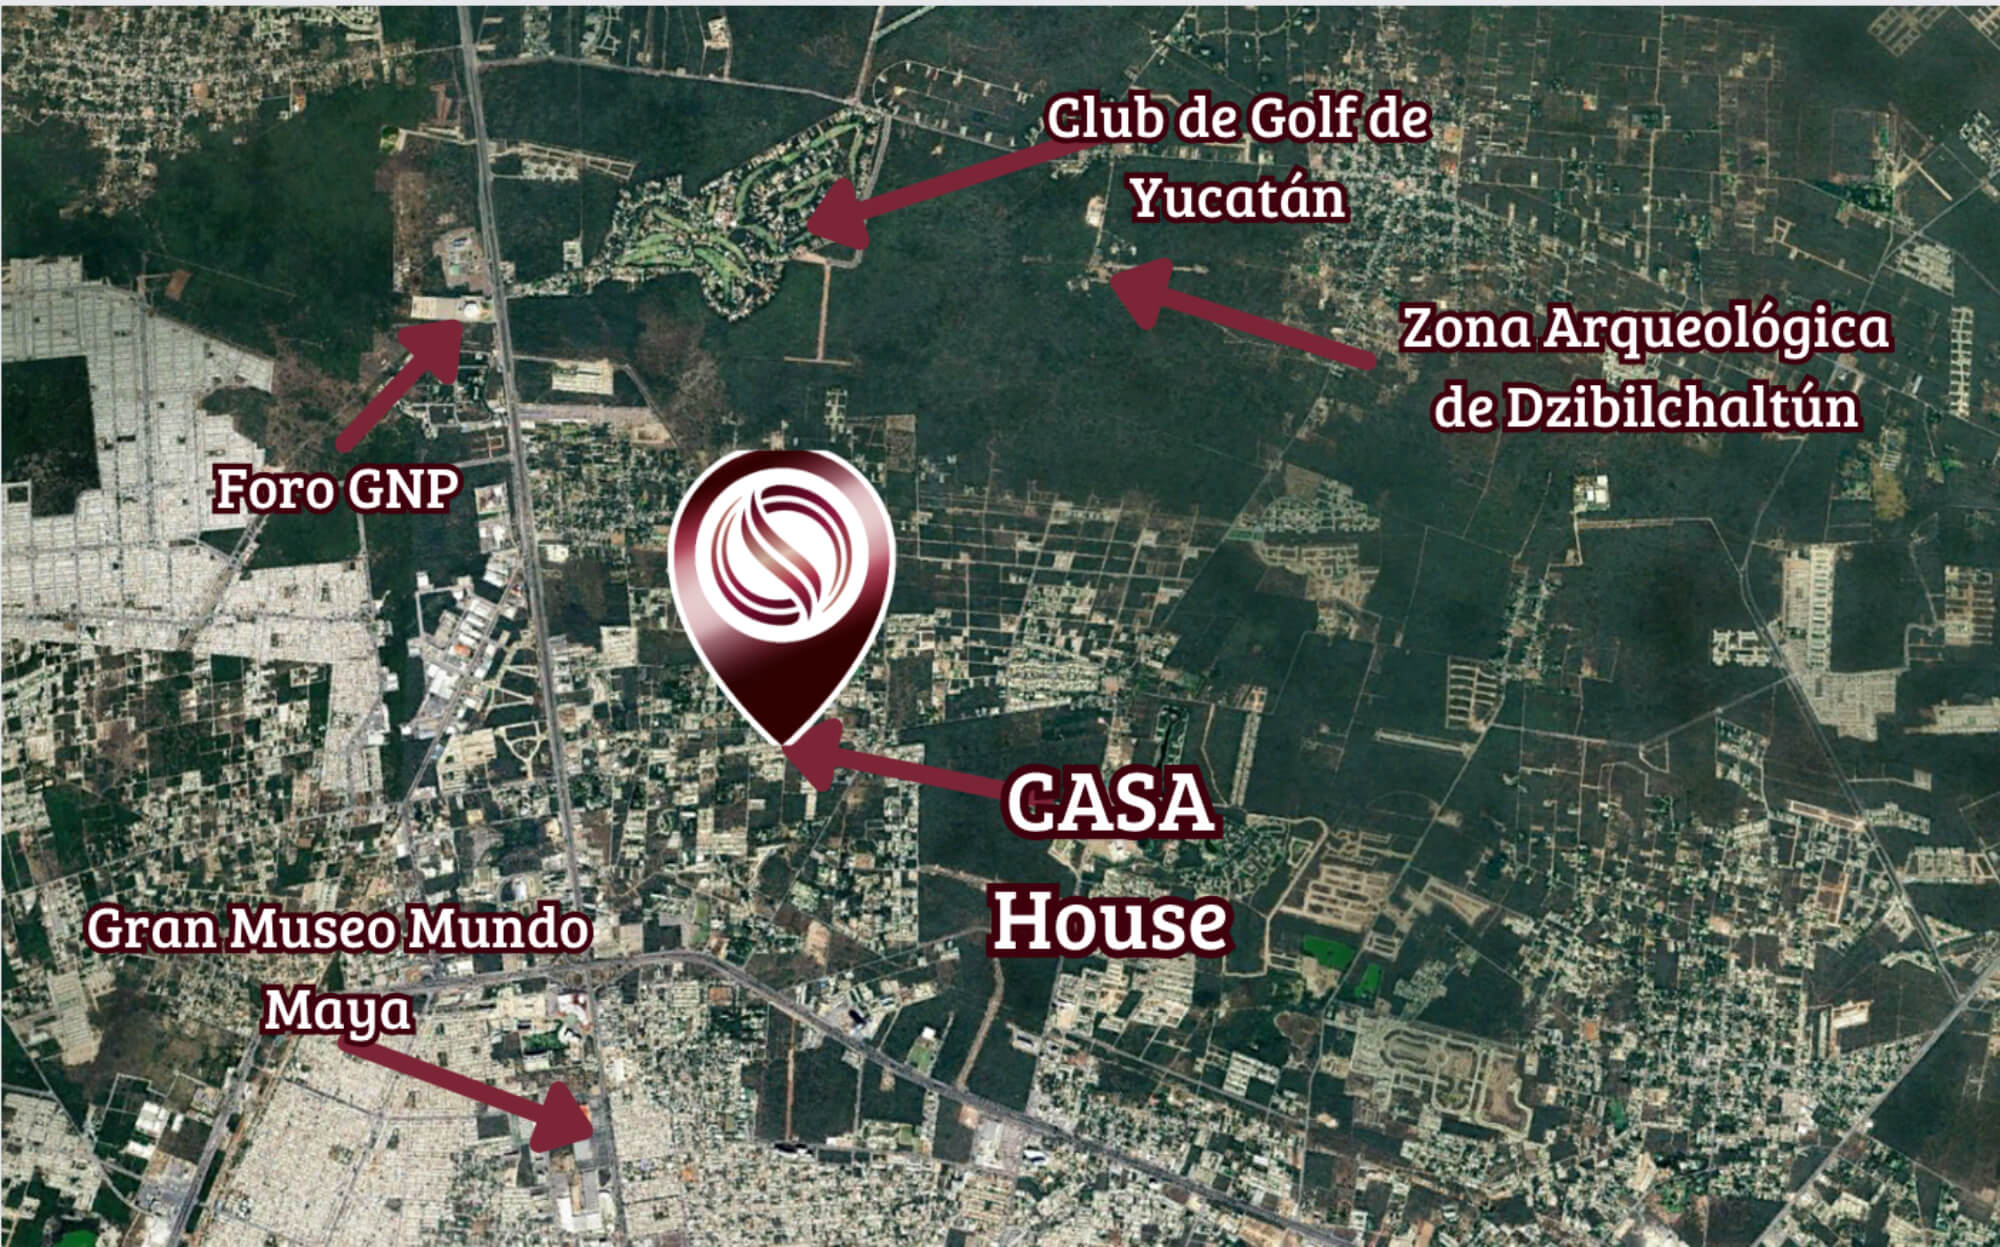 Residence with garden and pool, covered terrace, for sale, Xcanatun, Merida, Yucatan.